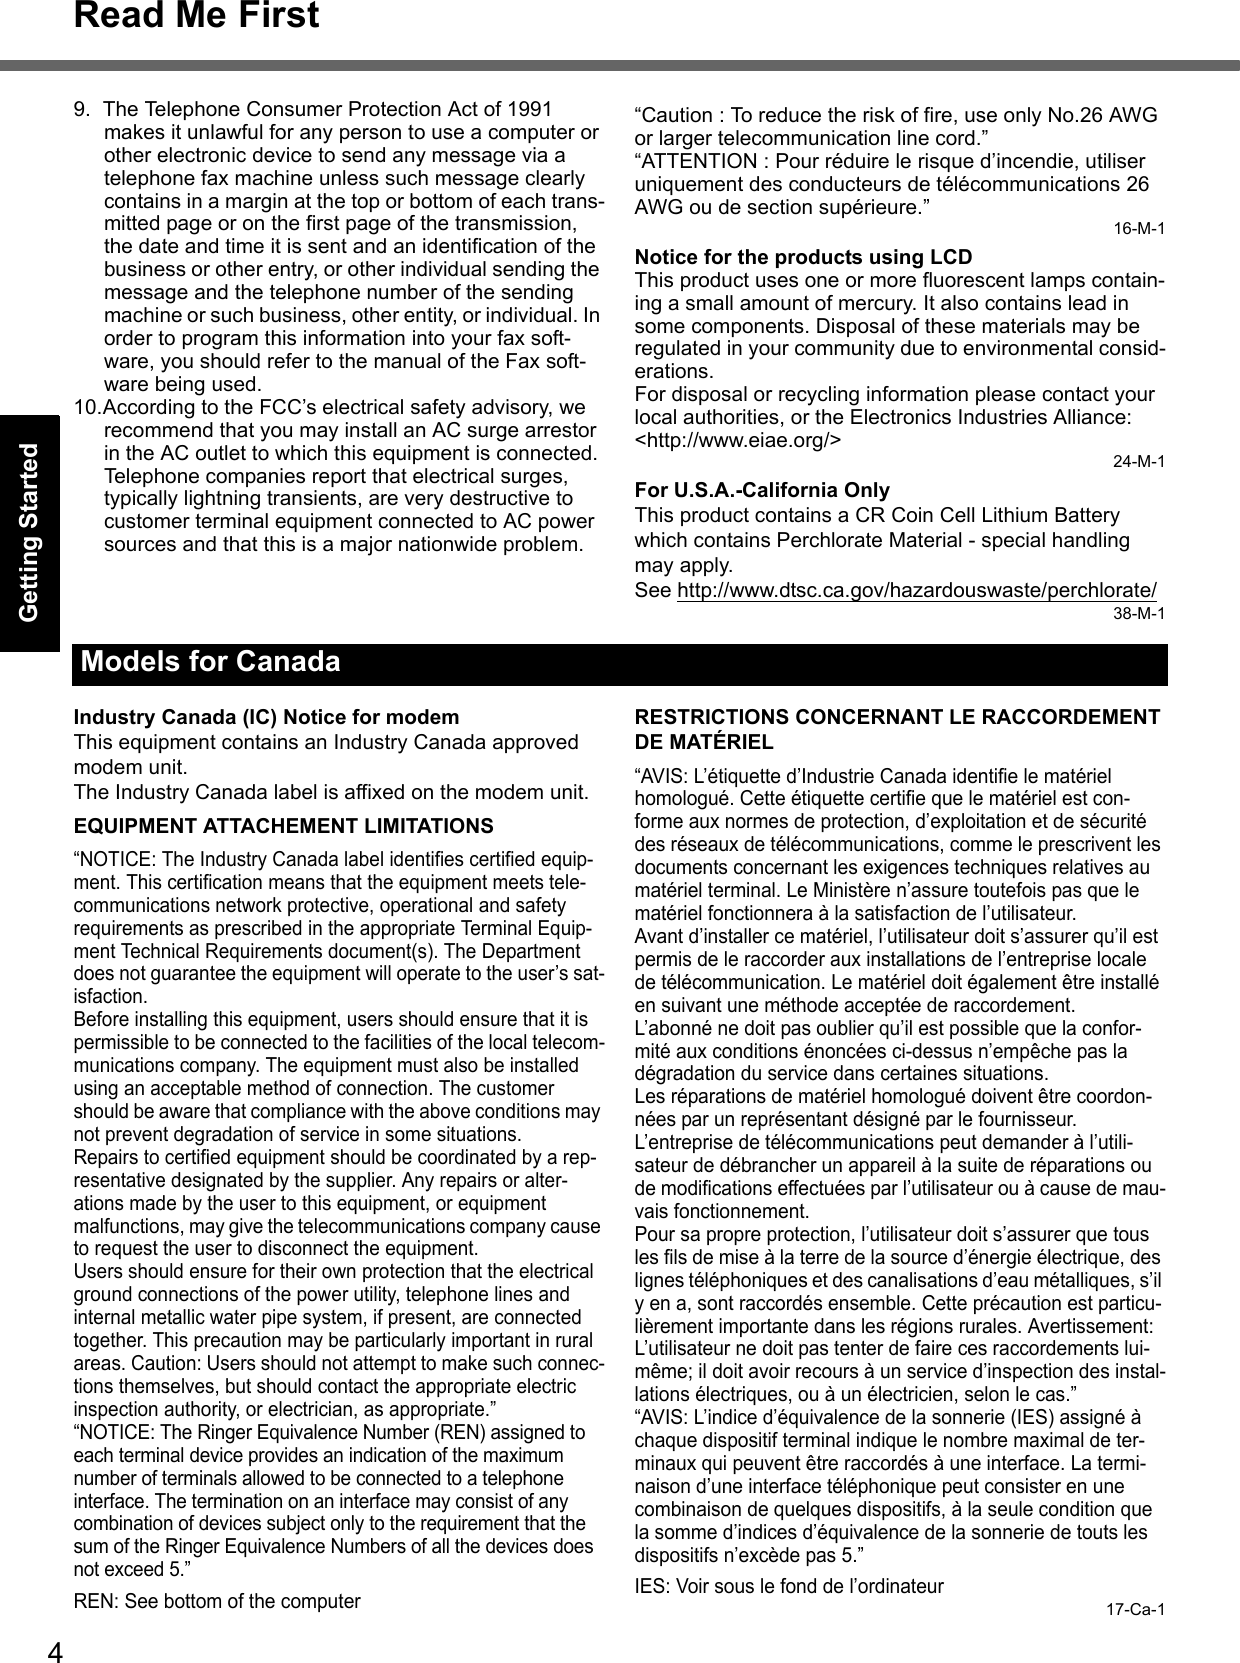 4Read Me FirstGetting StartedUseful InformationTroubleshootingAppendix9. The Telephone Consumer Protection Act of 1991 makes it unlawful for any person to use a computer or other electronic device to send any message via a telephone fax machine unless such message clearly contains in a margin at the top or bottom of each trans-mitted page or on the first page of the transmission, the date and time it is sent and an identification of the business or other entry, or other individual sending the message and the telephone number of the sending machine or such business, other entity, or individual. In order to program this information into your fax soft-ware, you should refer to the manual of the Fax soft-ware being used.10.According to the FCC’s electrical safety advisory, we recommend that you may install an AC surge arrestor in the AC outlet to which this equipment is connected. Telephone companies report that electrical surges, typically lightning transients, are very destructive to customer terminal equipment connected to AC power sources and that this is a major nationwide problem.“Caution : To reduce the risk of fire, use only No.26 AWG or larger telecommunication line cord.”“ATTENTION : Pour réduire le risque d’incendie, utiliser uniquement des conducteurs de télécommunications 26 AWG ou de section supérieure.”16-M-1Notice for the products using LCDThis product uses one or more fluorescent lamps contain-ing a small amount of mercury. It also contains lead in some components. Disposal of these materials may be regulated in your community due to environmental consid-erations. For disposal or recycling information please contact your local authorities, or the Electronics Industries Alliance: &lt;http://www.eiae.org/&gt;24-M-1For U.S.A.-California OnlyThis product contains a CR Coin Cell Lithium Battery which contains Perchlorate Material - special handling may apply. See http://www.dtsc.ca.gov/hazardouswaste/perchlorate/38-M-1Industry Canada (IC) Notice for modemThis equipment contains an Industry Canada approved modem unit.The Industry Canada label is affixed on the modem unit.EQUIPMENT ATTACHEMENT LIMITATIONS“NOTICE: The Industry Canada label identifies certified equip-ment. This certification means that the equipment meets tele-communications network protective, operational and safety requirements as prescribed in the appropriate Terminal Equip-ment Technical Requirements document(s). The Department does not guarantee the equipment will operate to the user’s sat-isfaction.Before installing this equipment, users should ensure that it is permissible to be connected to the facilities of the local telecom-munications company. The equipment must also be installed using an acceptable method of connection. The customer should be aware that compliance with the above conditions may not prevent degradation of service in some situations.Repairs to certified equipment should be coordinated by a rep-resentative designated by the supplier. Any repairs or alter-ations made by the user to this equipment, or equipment malfunctions, may give the telecommunications company cause to request the user to disconnect the equipment.Users should ensure for their own protection that the electrical ground connections of the power utility, telephone lines and internal metallic water pipe system, if present, are connected together. This precaution may be particularly important in rural areas. Caution: Users should not attempt to make such connec-tions themselves, but should contact the appropriate electric inspection authority, or electrician, as appropriate.”“NOTICE: The Ringer Equivalence Number (REN) assigned to each terminal device provides an indication of the maximum number of terminals allowed to be connected to a telephone interface. The termination on an interface may consist of any combination of devices subject only to the requirement that the sum of the Ringer Equivalence Numbers of all the devices does not exceed 5.”REN: See bottom of the computerRESTRICTIONS CONCERNANT LE RACCORDEMENTDE MATÉRIEL“AVIS: L’étiquette d’Industrie Canada identifie le matériel homologué. Cette étiquette certifie que le matériel est con-forme aux normes de protection, d’exploitation et de sécurité des réseaux de télécommunications, comme le prescrivent les documents concernant les exigences techniques relatives au matériel terminal. Le Ministère n’assure toutefois pas que le matériel fonctionnera à la satisfaction de l’utilisateur.Avant d’installer ce matériel, l’utilisateur doit s’assurer qu’il est permis de le raccorder aux installations de l’entreprise locale de télécommunication. Le matériel doit également être installé en suivant une méthode acceptée de raccordement.L’abonné ne doit pas oublier qu’il est possible que la confor-mité aux conditions énoncées ci-dessus n’empêche pas la dégradation du service dans certaines situations.Les réparations de matériel homologué doivent être coordon-nées par un représentant désigné par le fournisseur.L’entreprise de télécommunications peut demander à l’utili-sateur de débrancher un appareil à la suite de réparations ou de modifications effectuées par l’utilisateur ou à cause de mau-vais fonctionnement.Pour sa propre protection, l’utilisateur doit s’assurer que tous les fils de mise à la terre de la source d’énergie électrique, des lignes téléphoniques et des canalisations d’eau métalliques, s’il y en a, sont raccordés ensemble. Cette précaution est particu-lièrement importante dans les régions rurales. Avertissement: L’utilisateur ne doit pas tenter de faire ces raccordements lui-même; il doit avoir recours à un service d’inspection des instal-lations électriques, ou à un électricien, selon le cas.”“AVIS: L’indice d’équivalence de la sonnerie (IES) assigné à chaque dispositif terminal indique le nombre maximal de ter-minaux qui peuvent être raccordés à une interface. La termi-naison d’une interface téléphonique peut consister en une combinaison de quelques dispositifs, à la seule condition que la somme d’indices d’équivalence de la sonnerie de touts les dispositifs n’excède pas 5.”IES: Voir sous le fond de l’ordinateur17-Ca-1Models for Canada